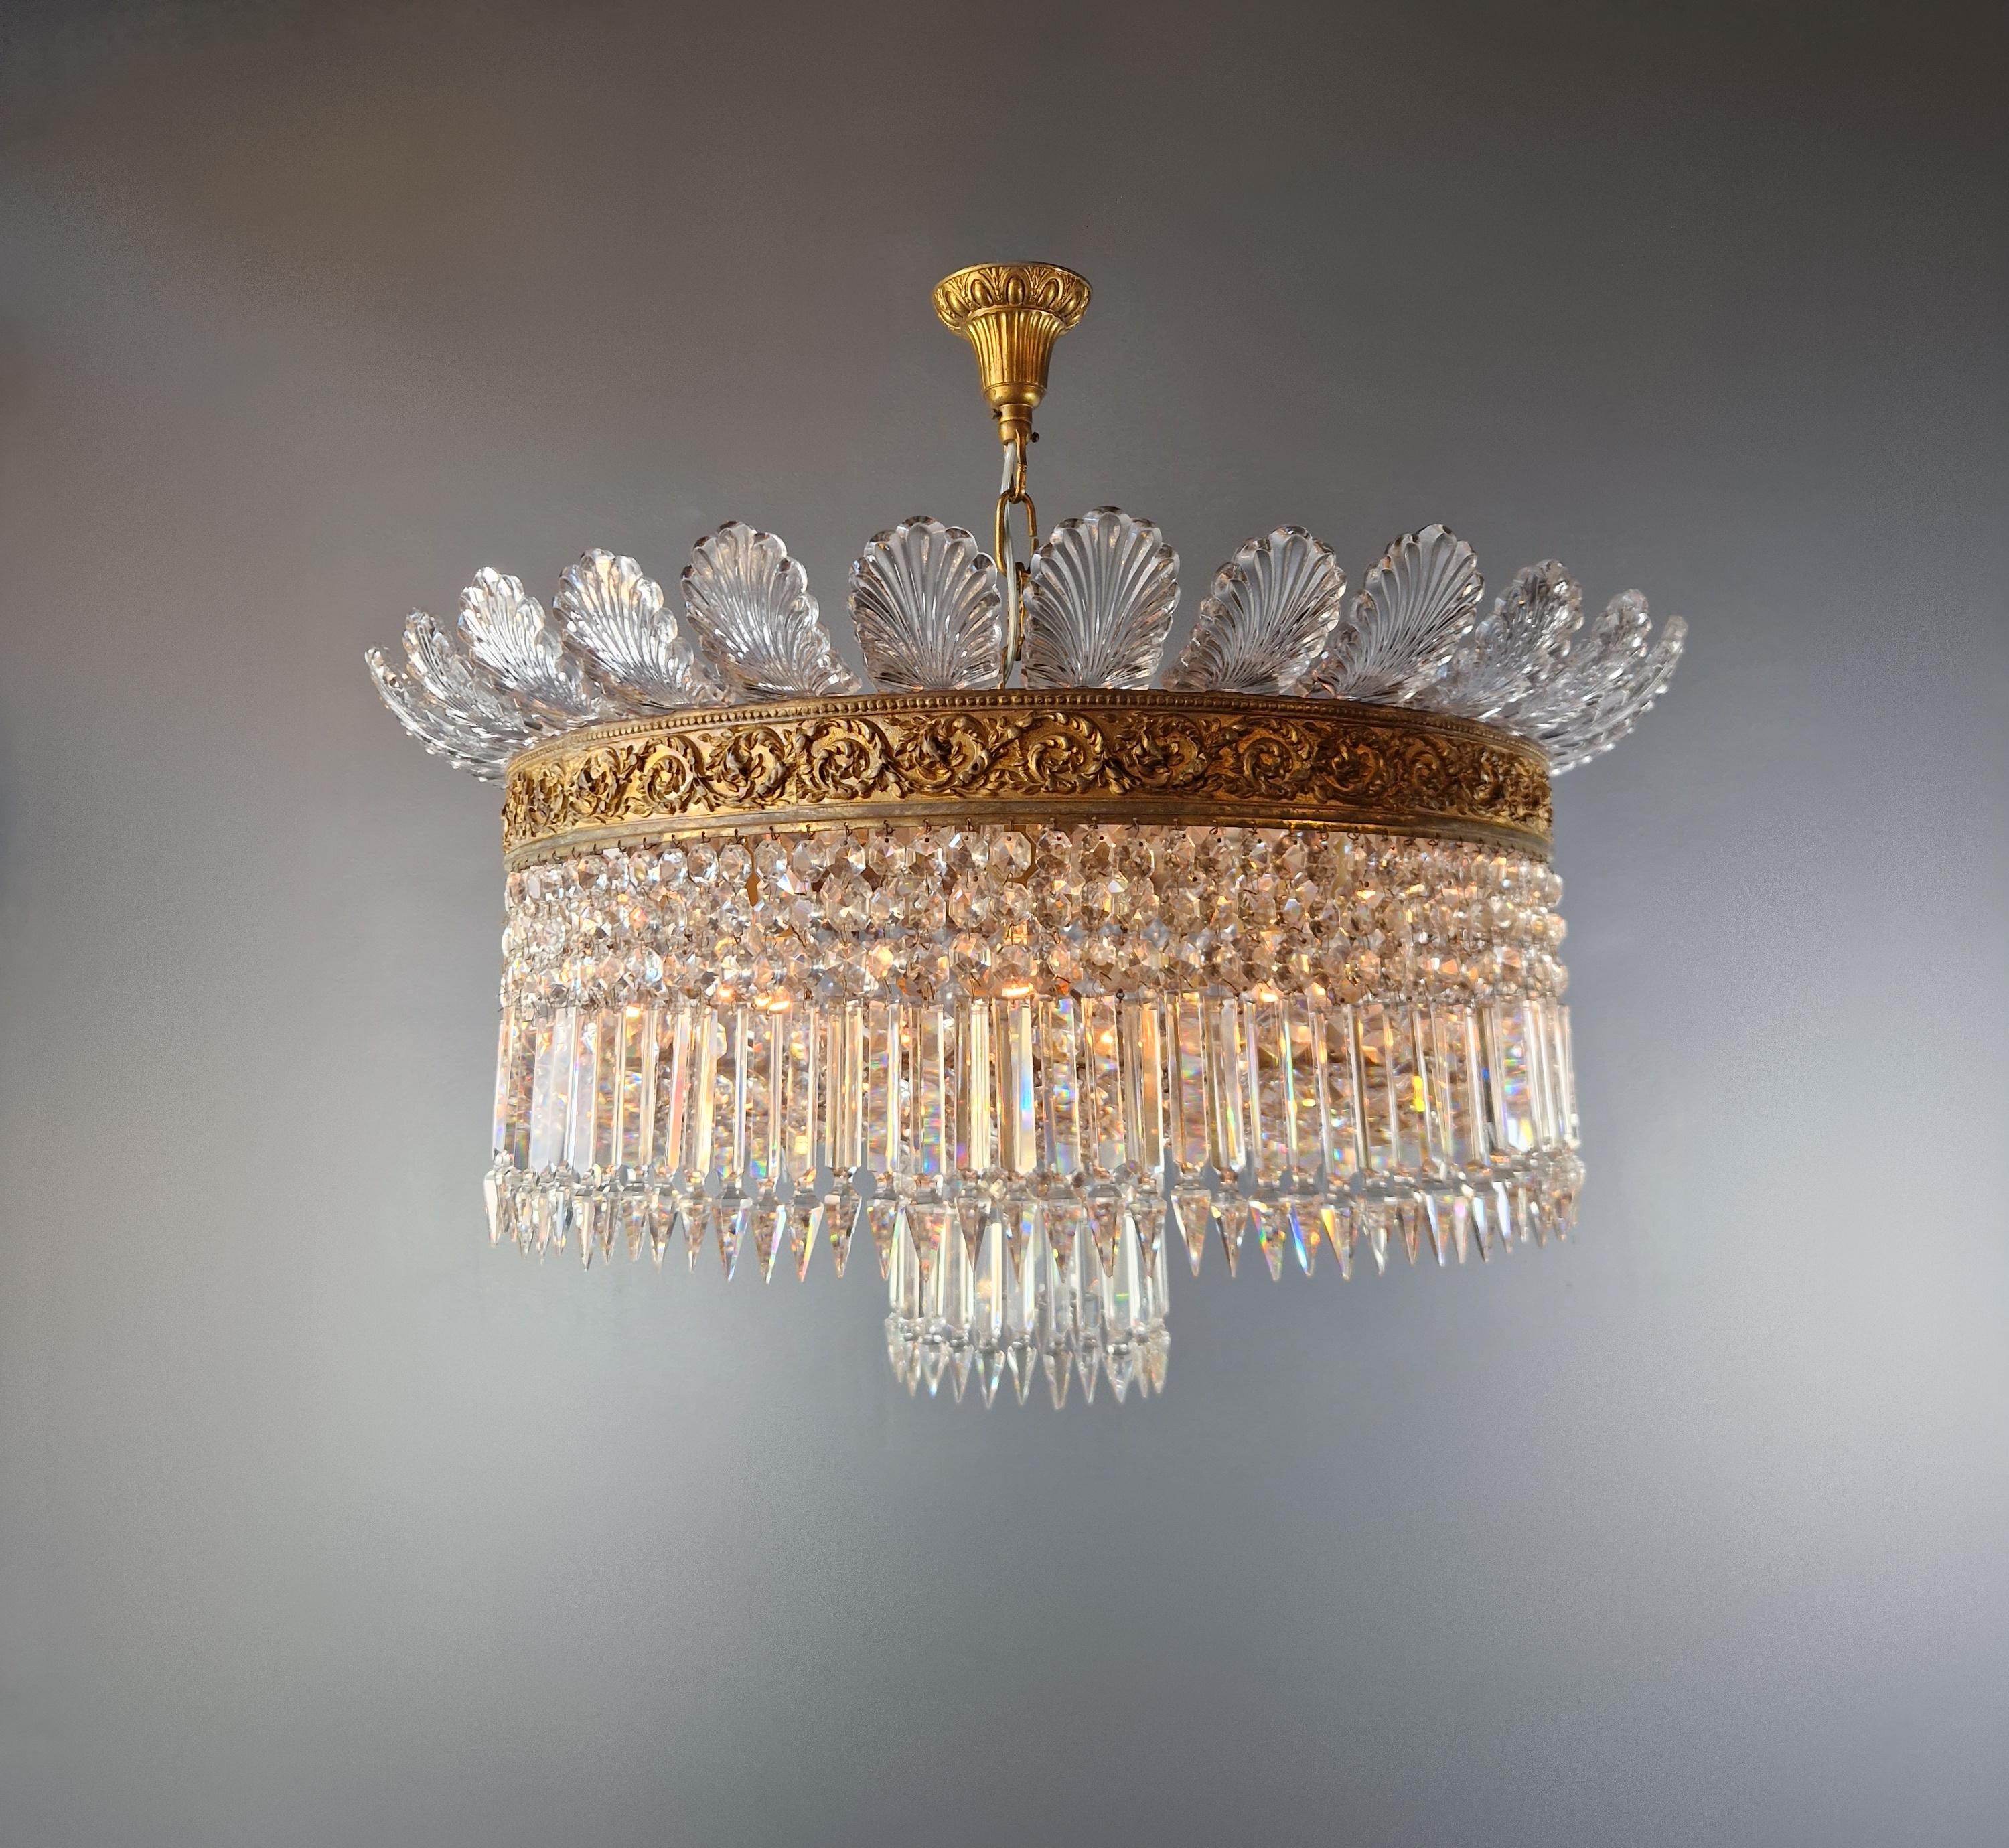 Exquisite Antique Chandelier: A restored masterpiece from the past

Discover the charm of a bygone era with our carefully restored antique chandelier, a true labor of love from Berlin. Meticulously tailored to U.S. electrical standards, this piece